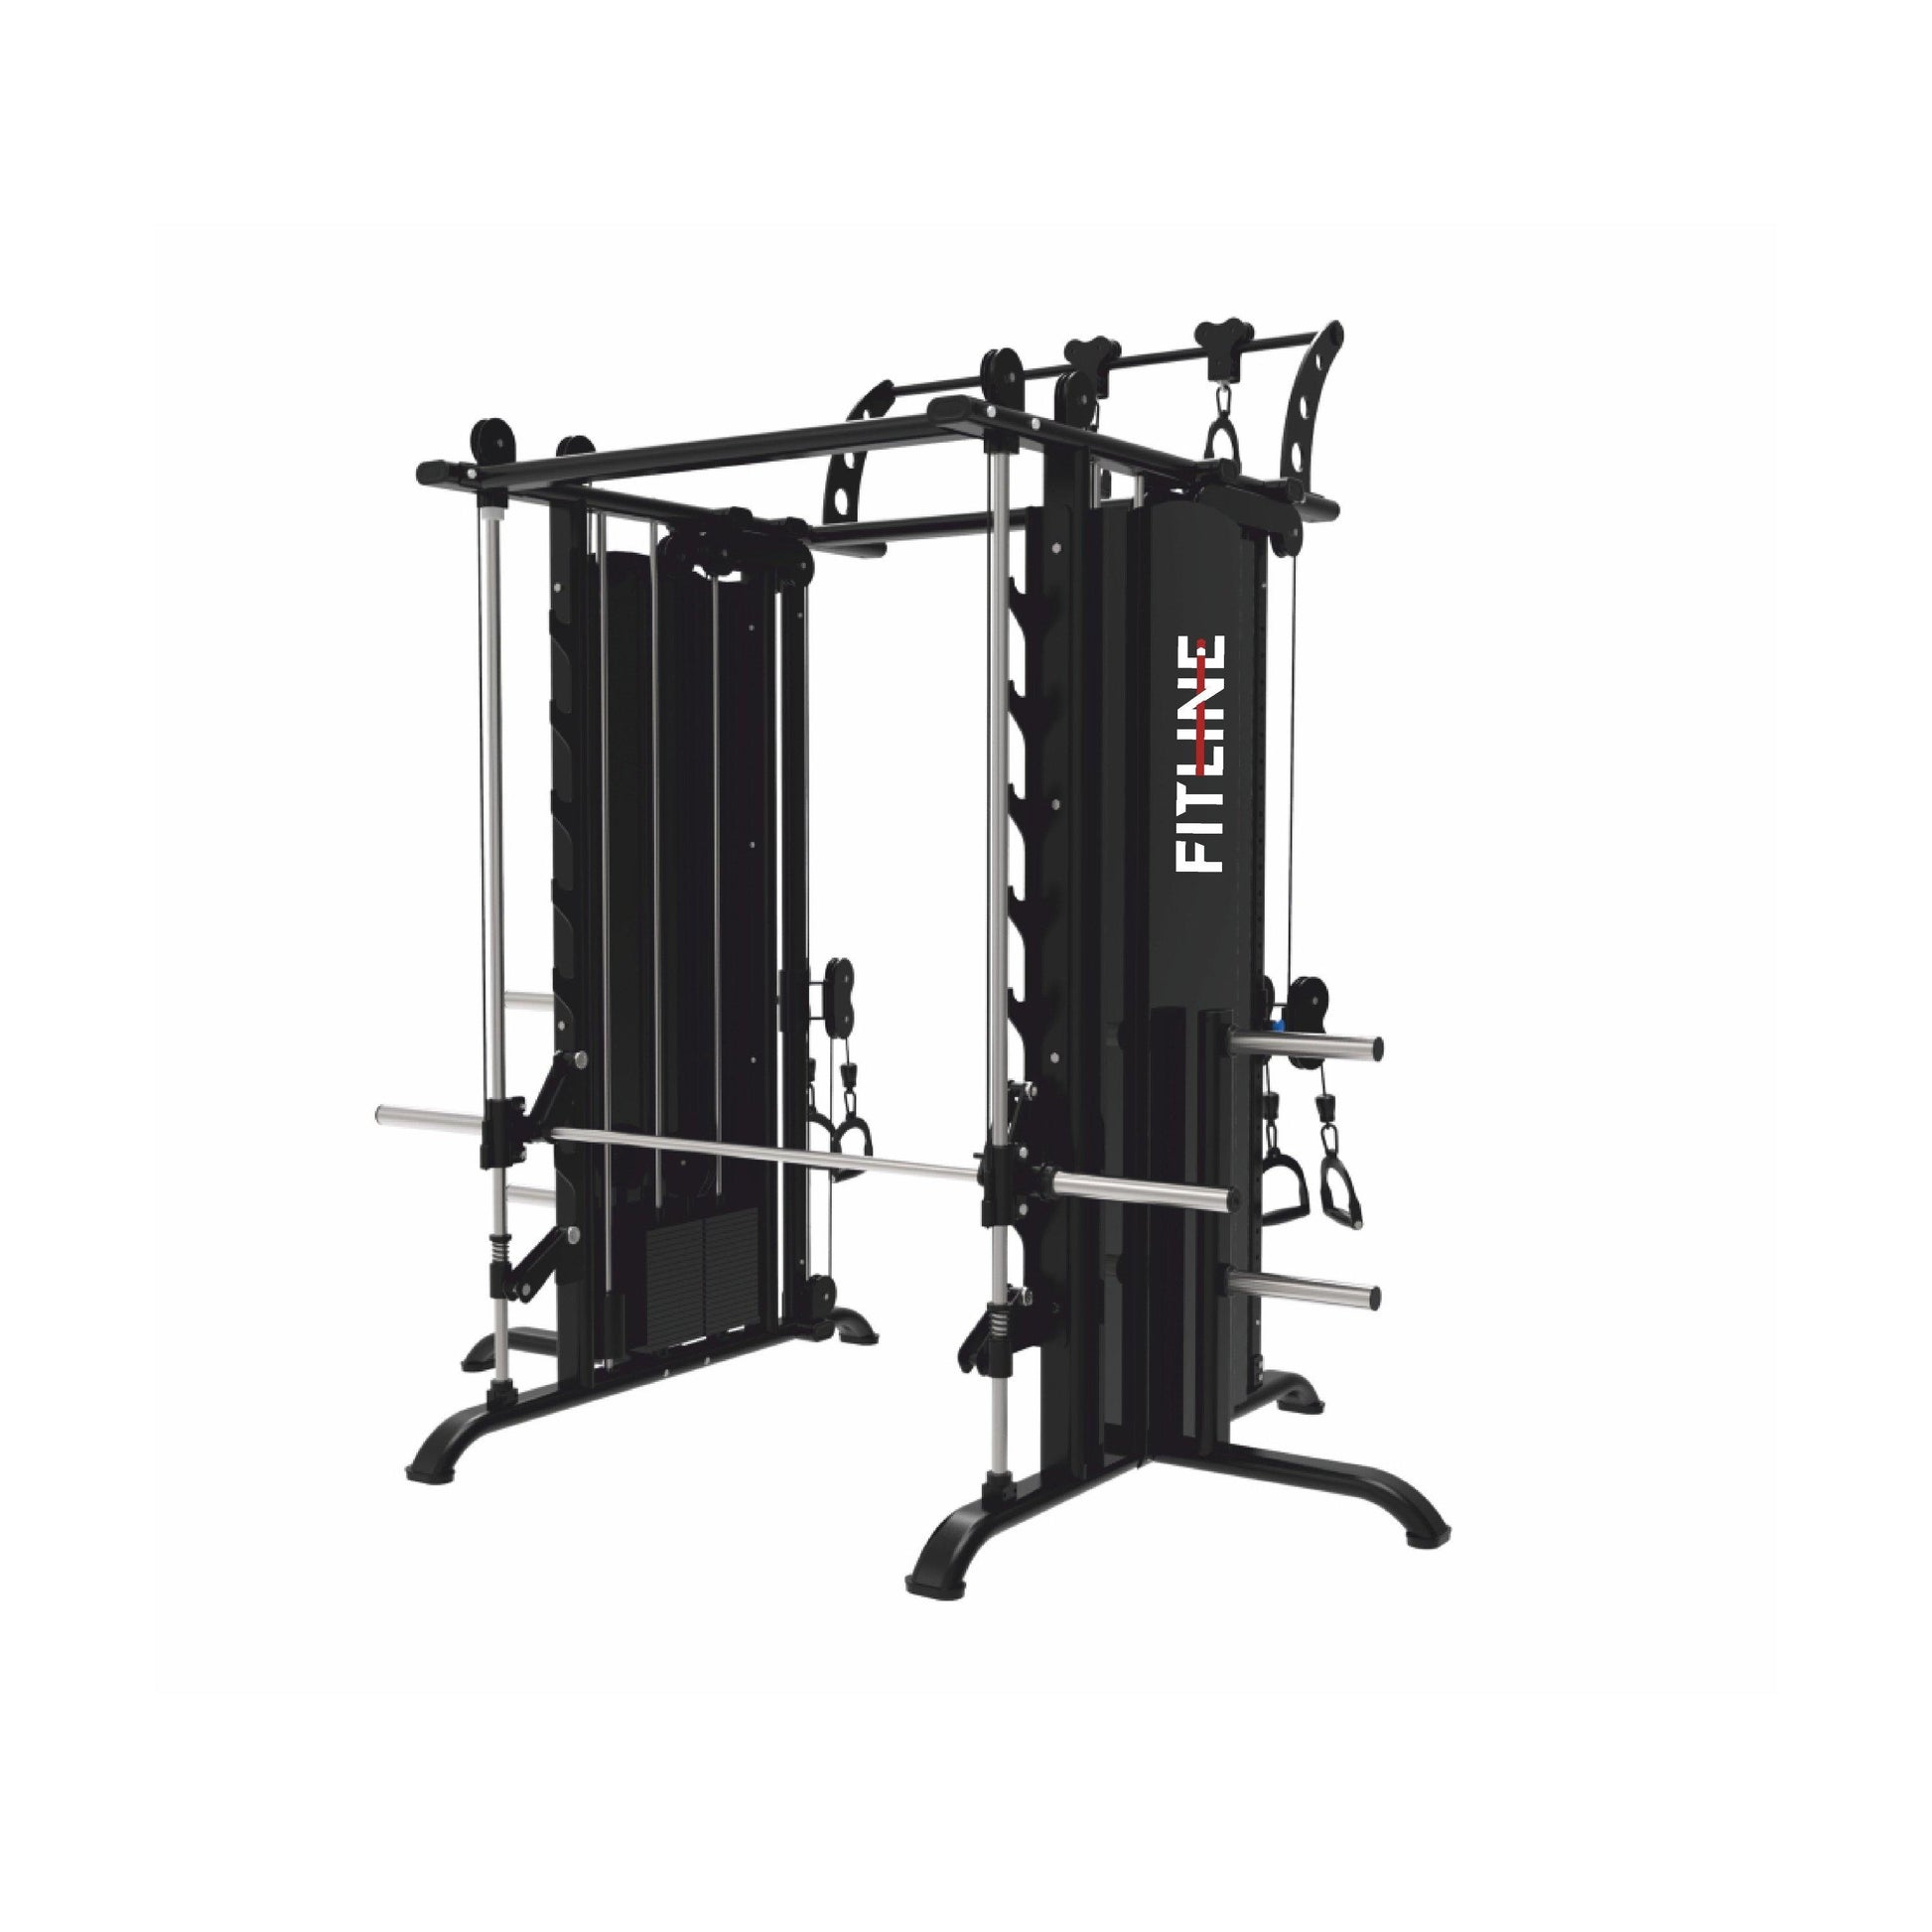 DZ-51 - FUNCTIONAL TRAINER WITH SMITH MACHINE - Fitline India